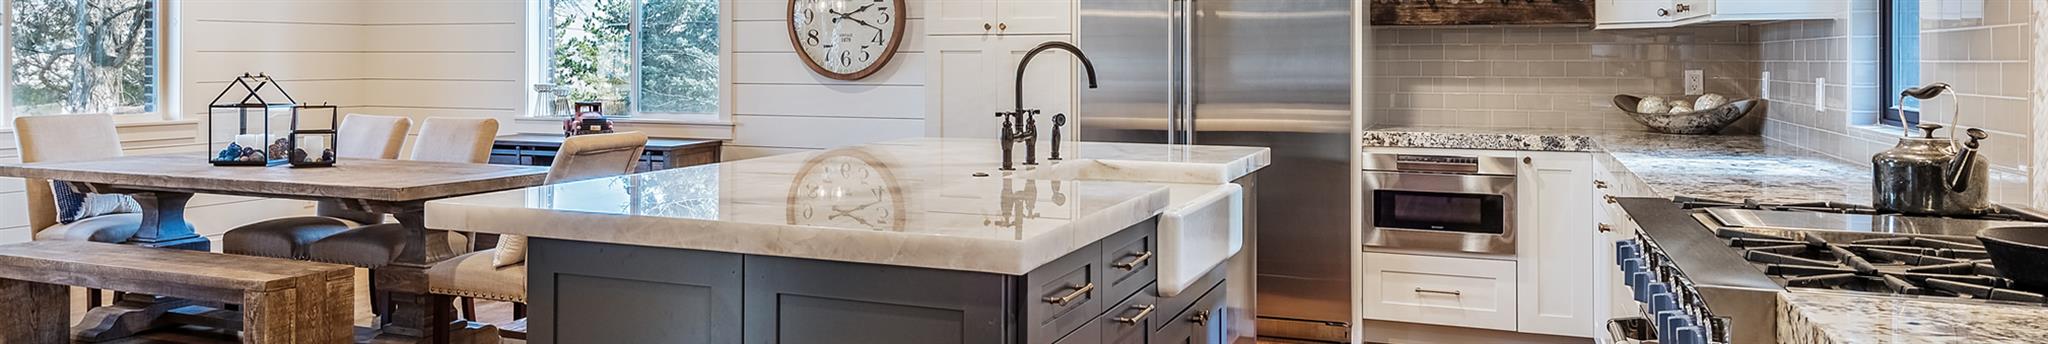 6 Common Misunderstandings and Myths about Granite